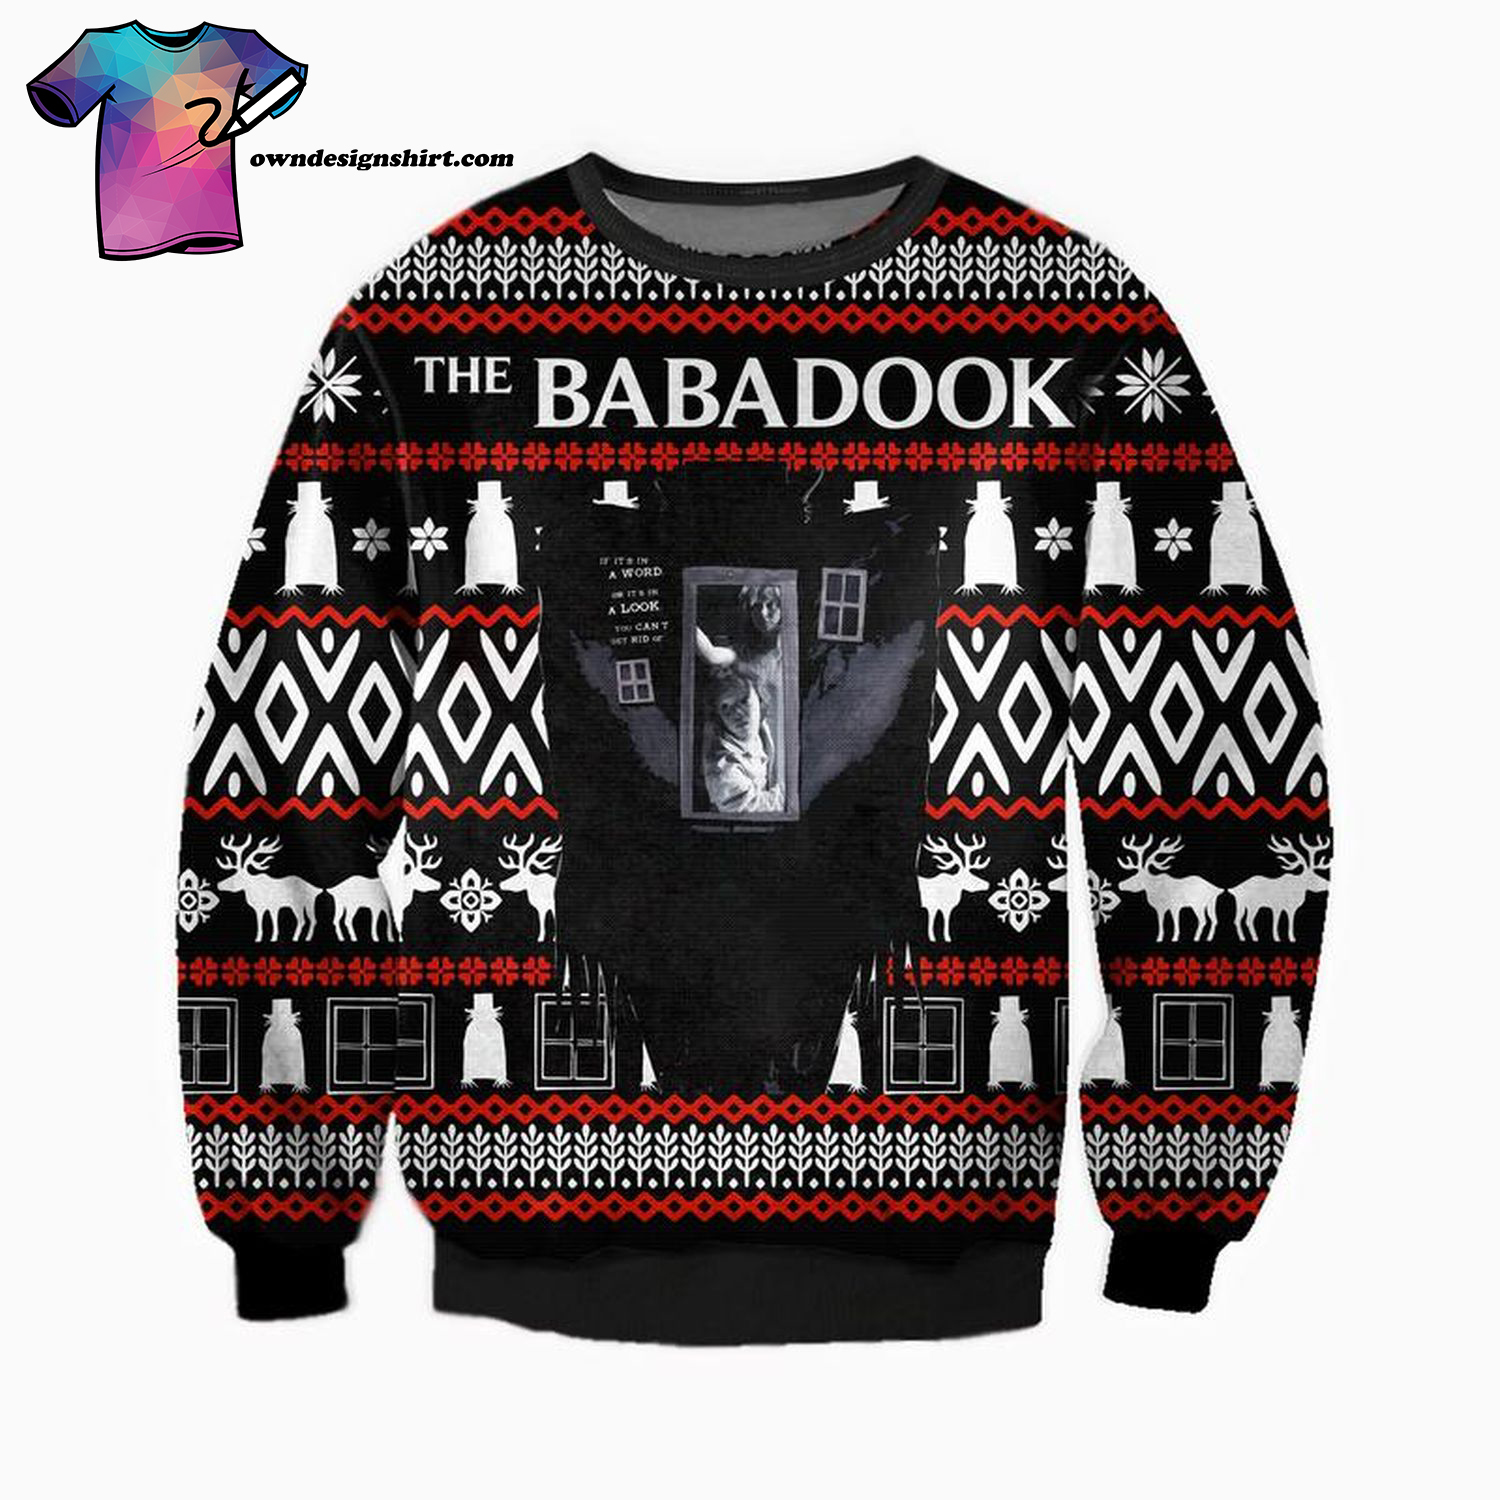 The Babadook All Over Printed Ugly Christmas Sweater